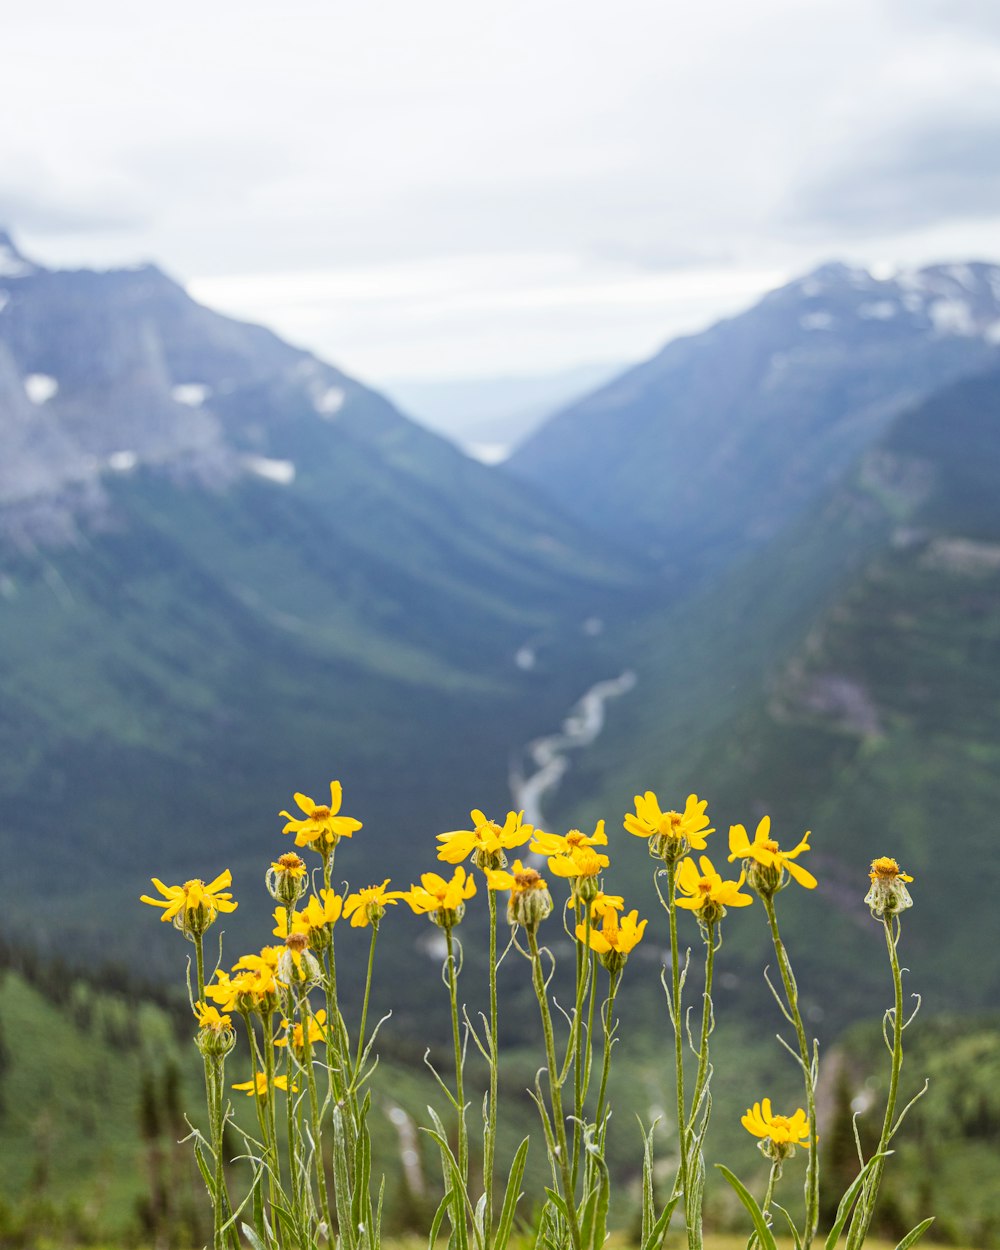 yellow flowers on green grass field near mountains during daytime